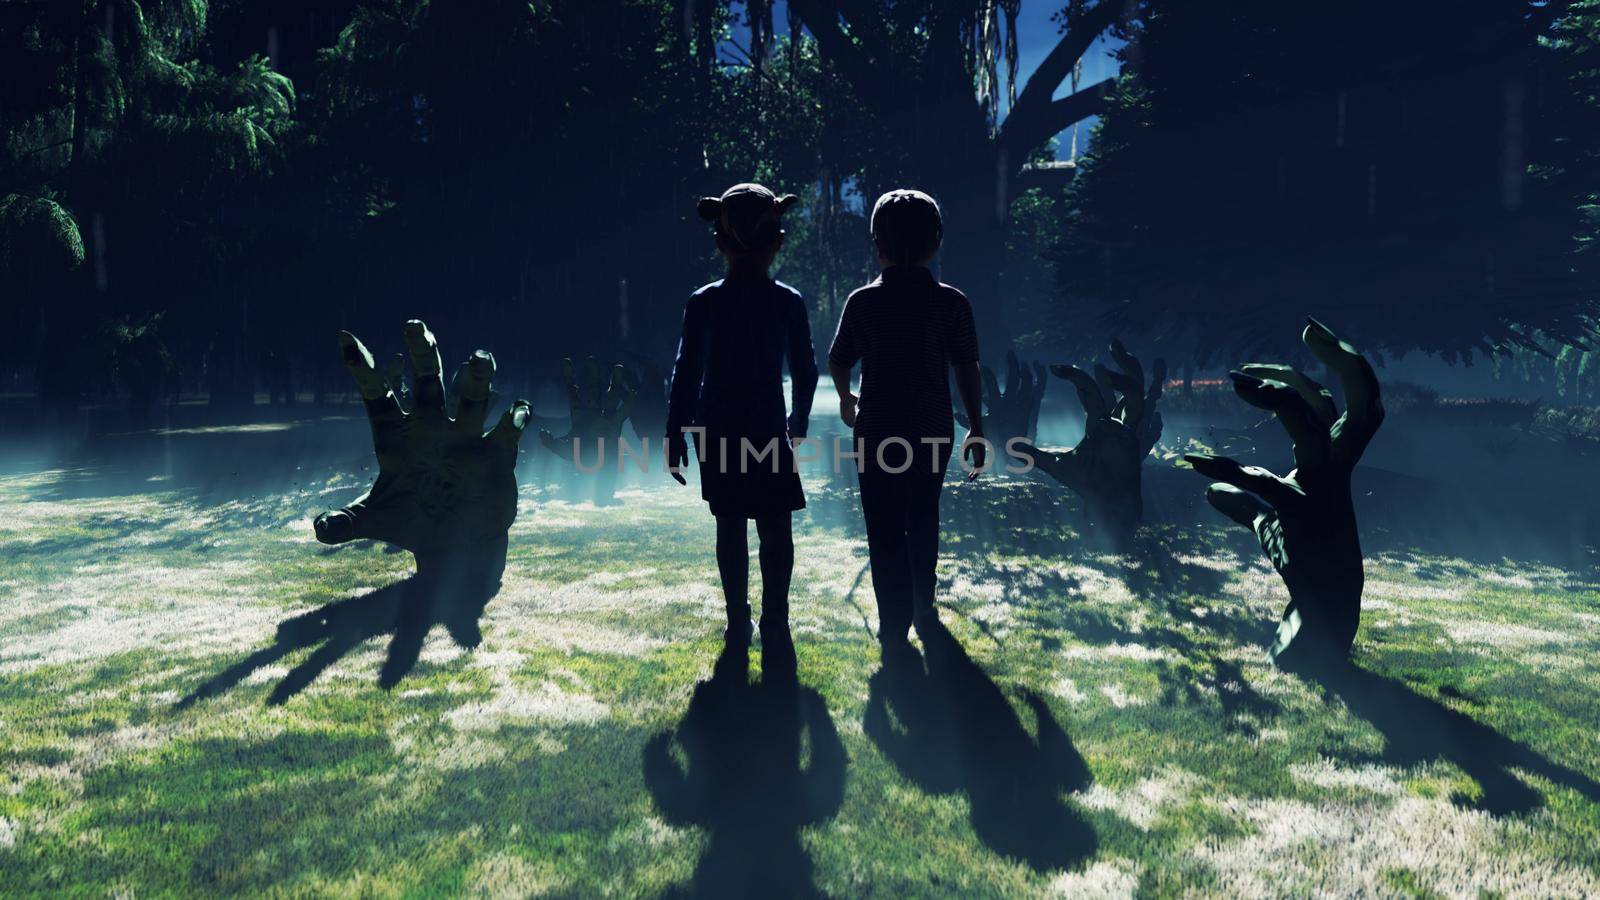 Little children walk through a dark mysterious misty swamp forest landscape. Dead hands reach for them from the ground, steam rises from the swamp, for a Halloween backdrop. 3D Rendering by designprojects